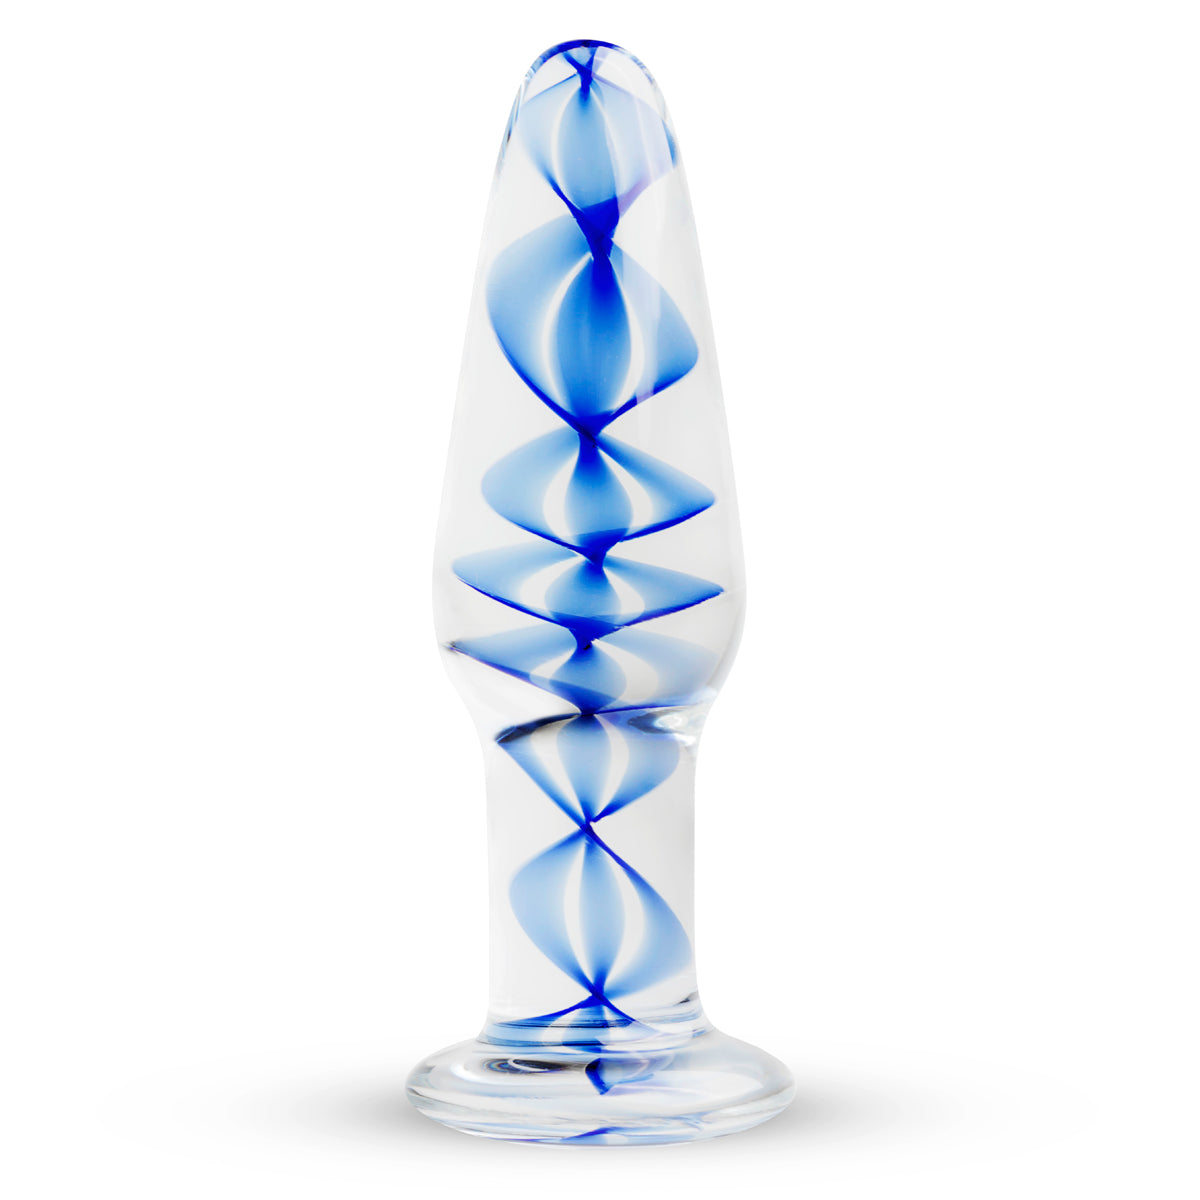 Glass Buttplug No 23 - Just for you desires